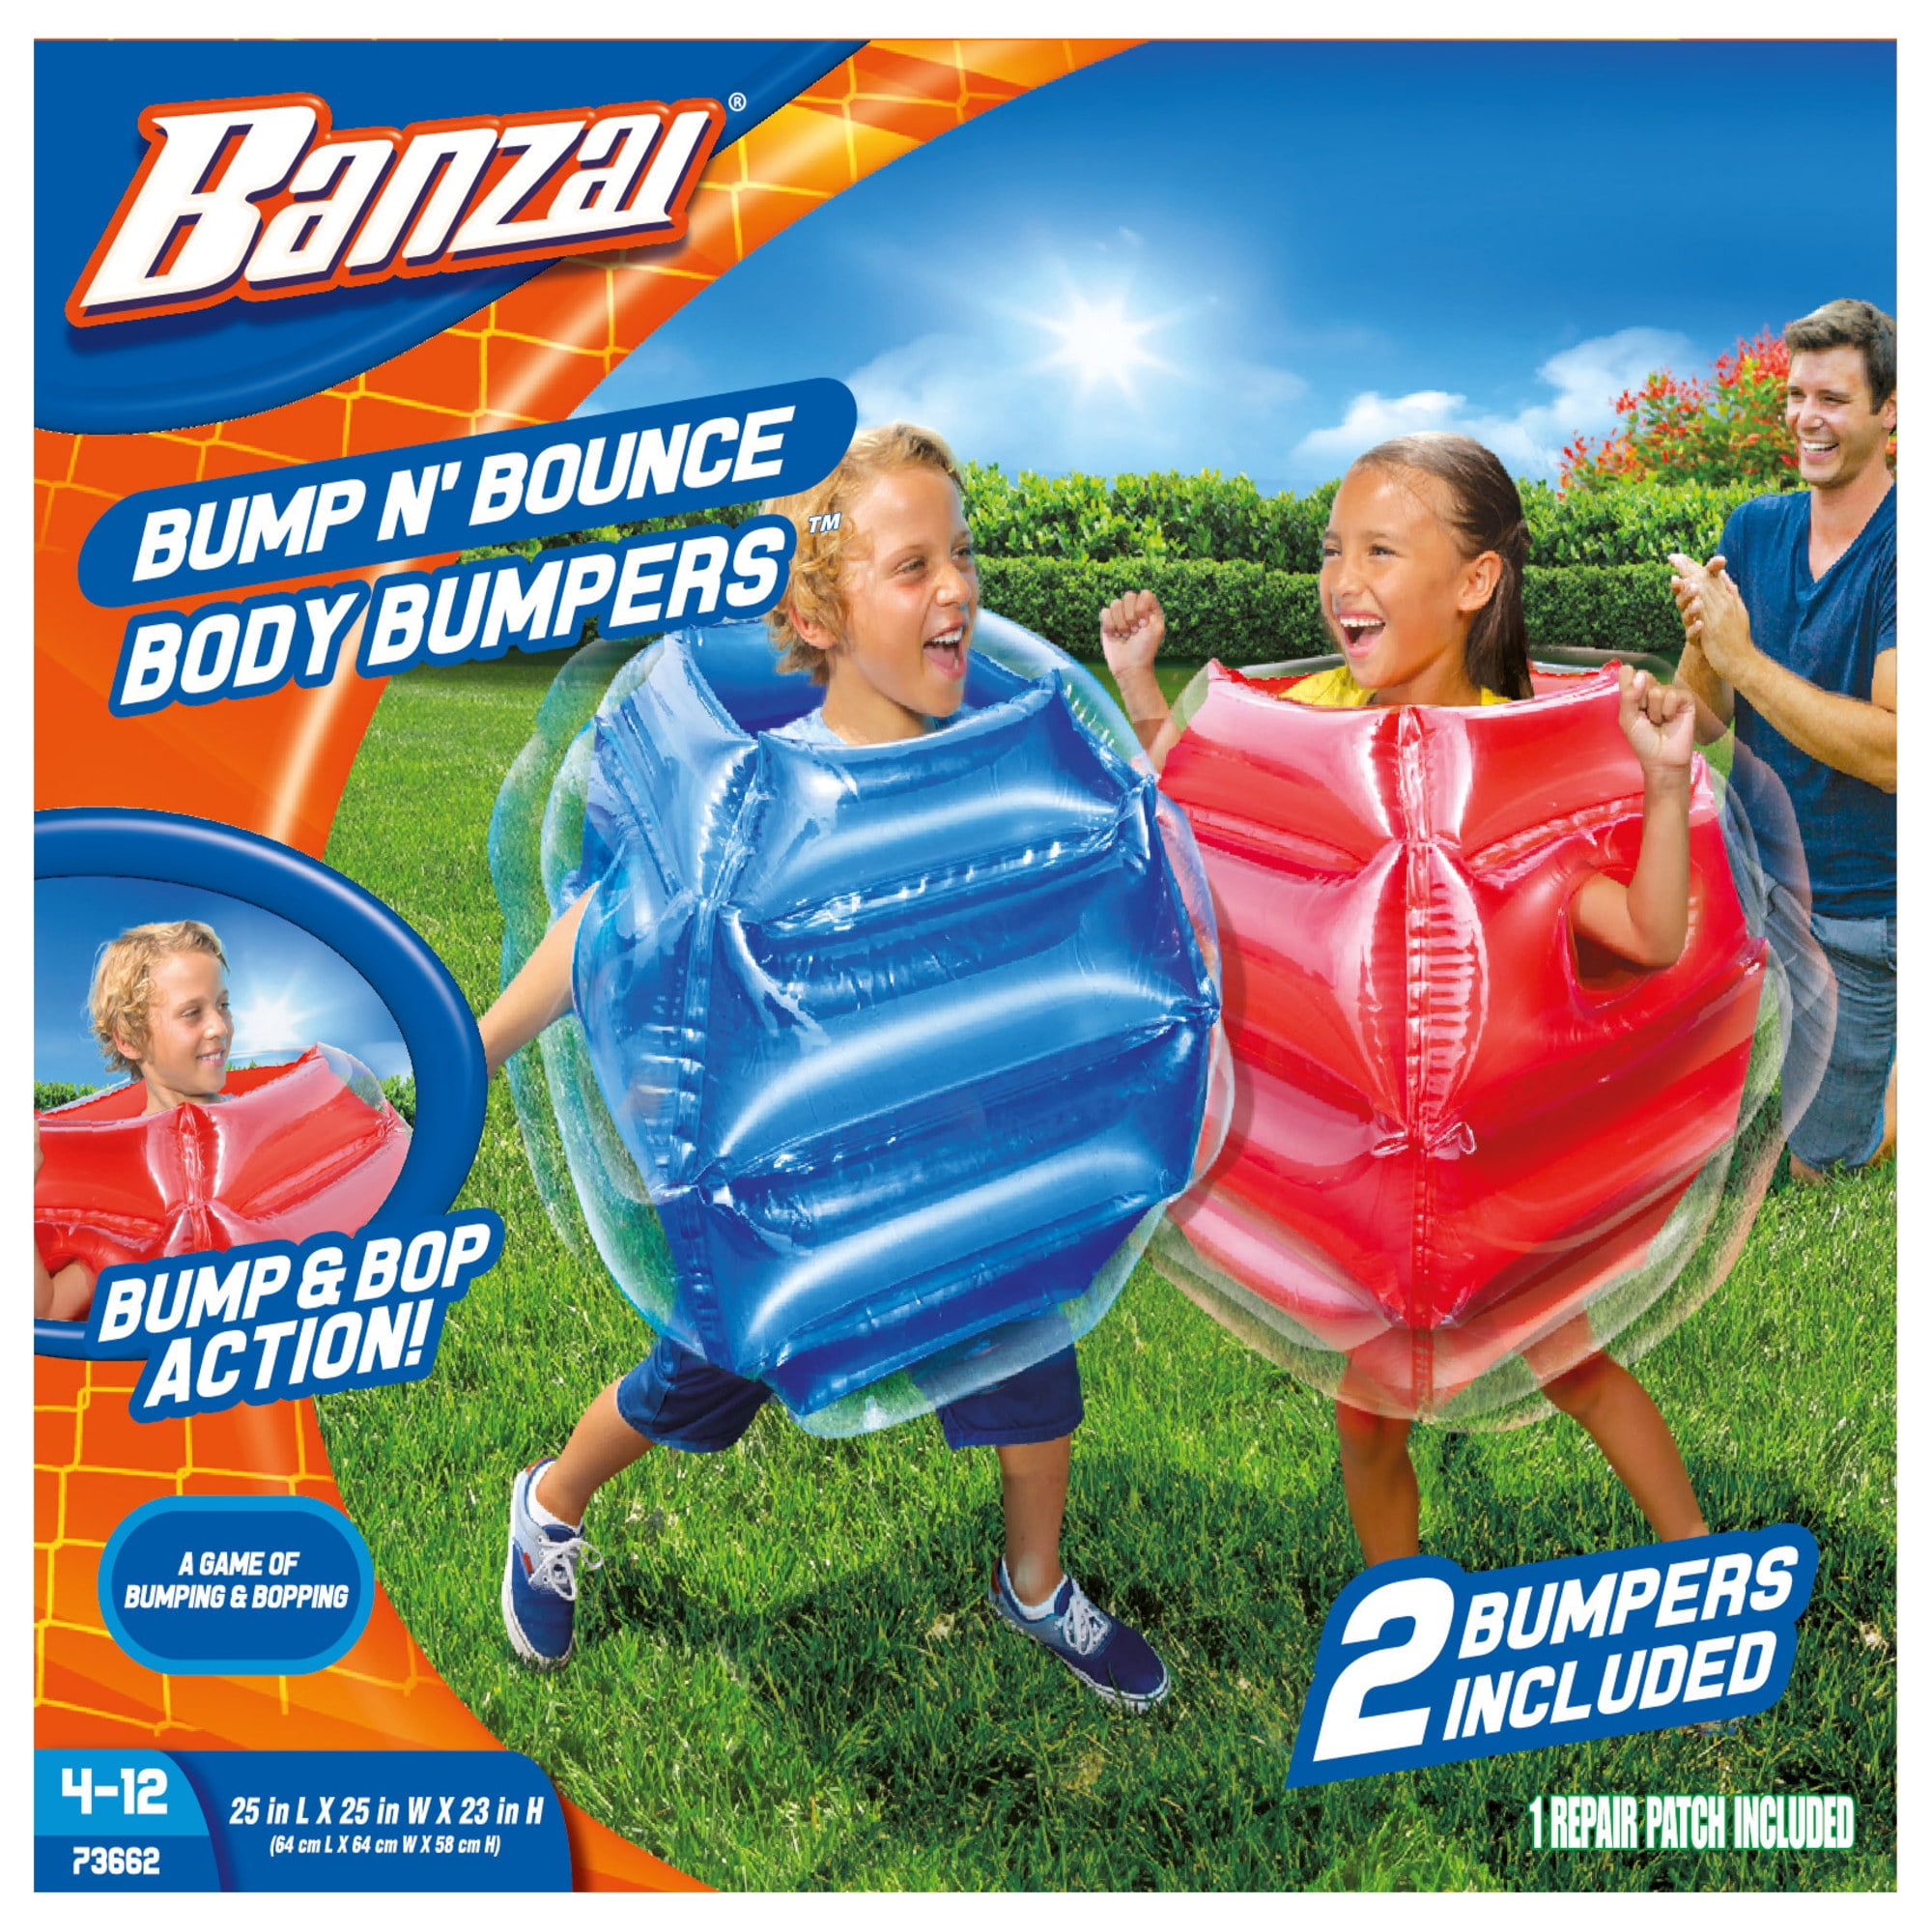 Bump And Bounce Body Bumpers 2 Bumpers Included Age 4 To 12 years BANZ-73662 